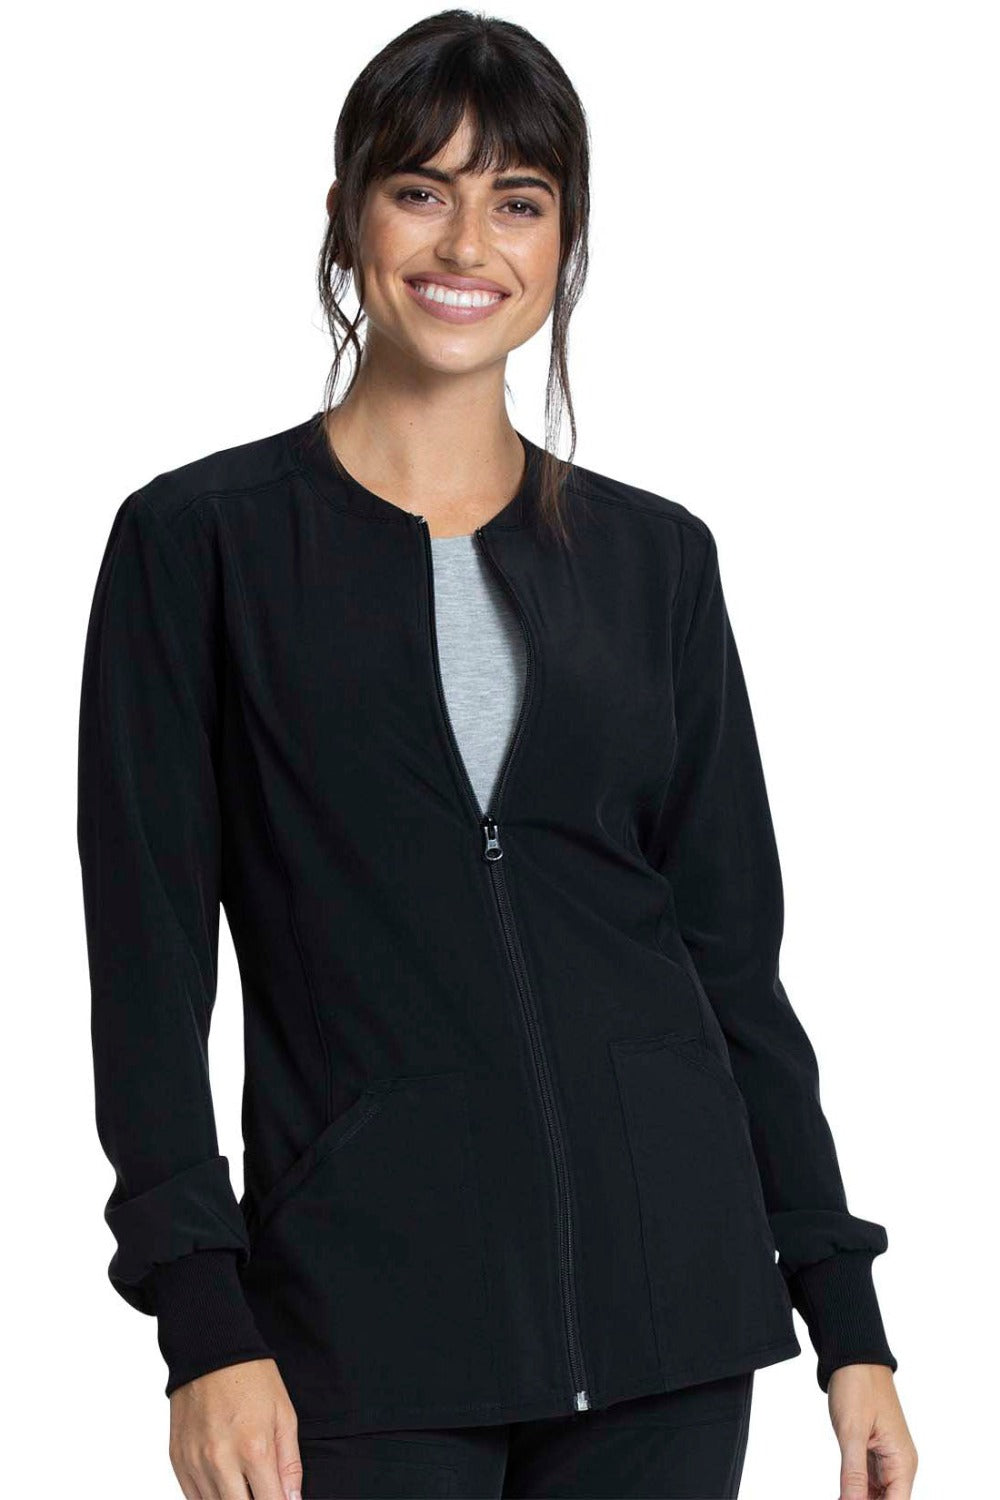 Cherokee Allura Round Neck Zipper Jacket in Black at Parker's Clothing and Shoes.